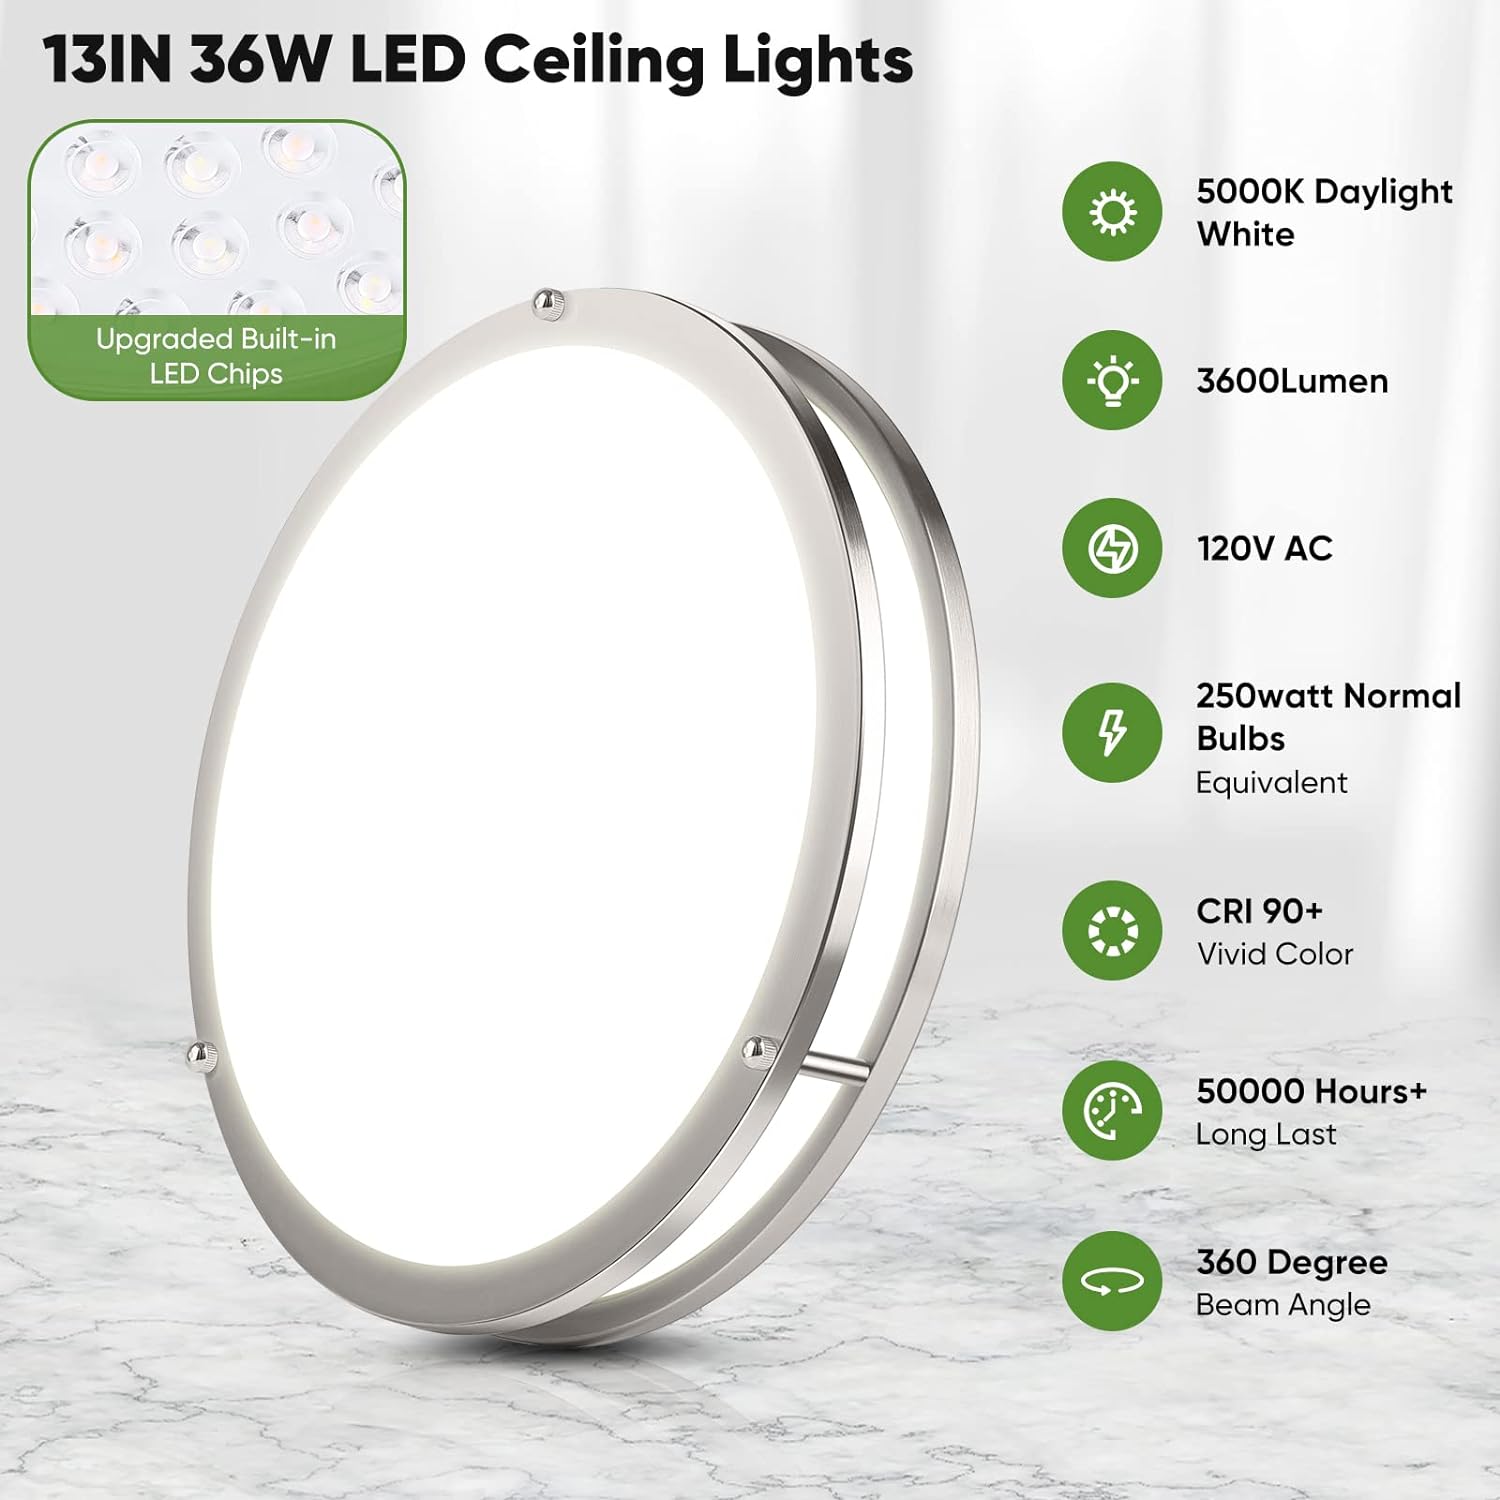 36W LED Ceiling Lights Review